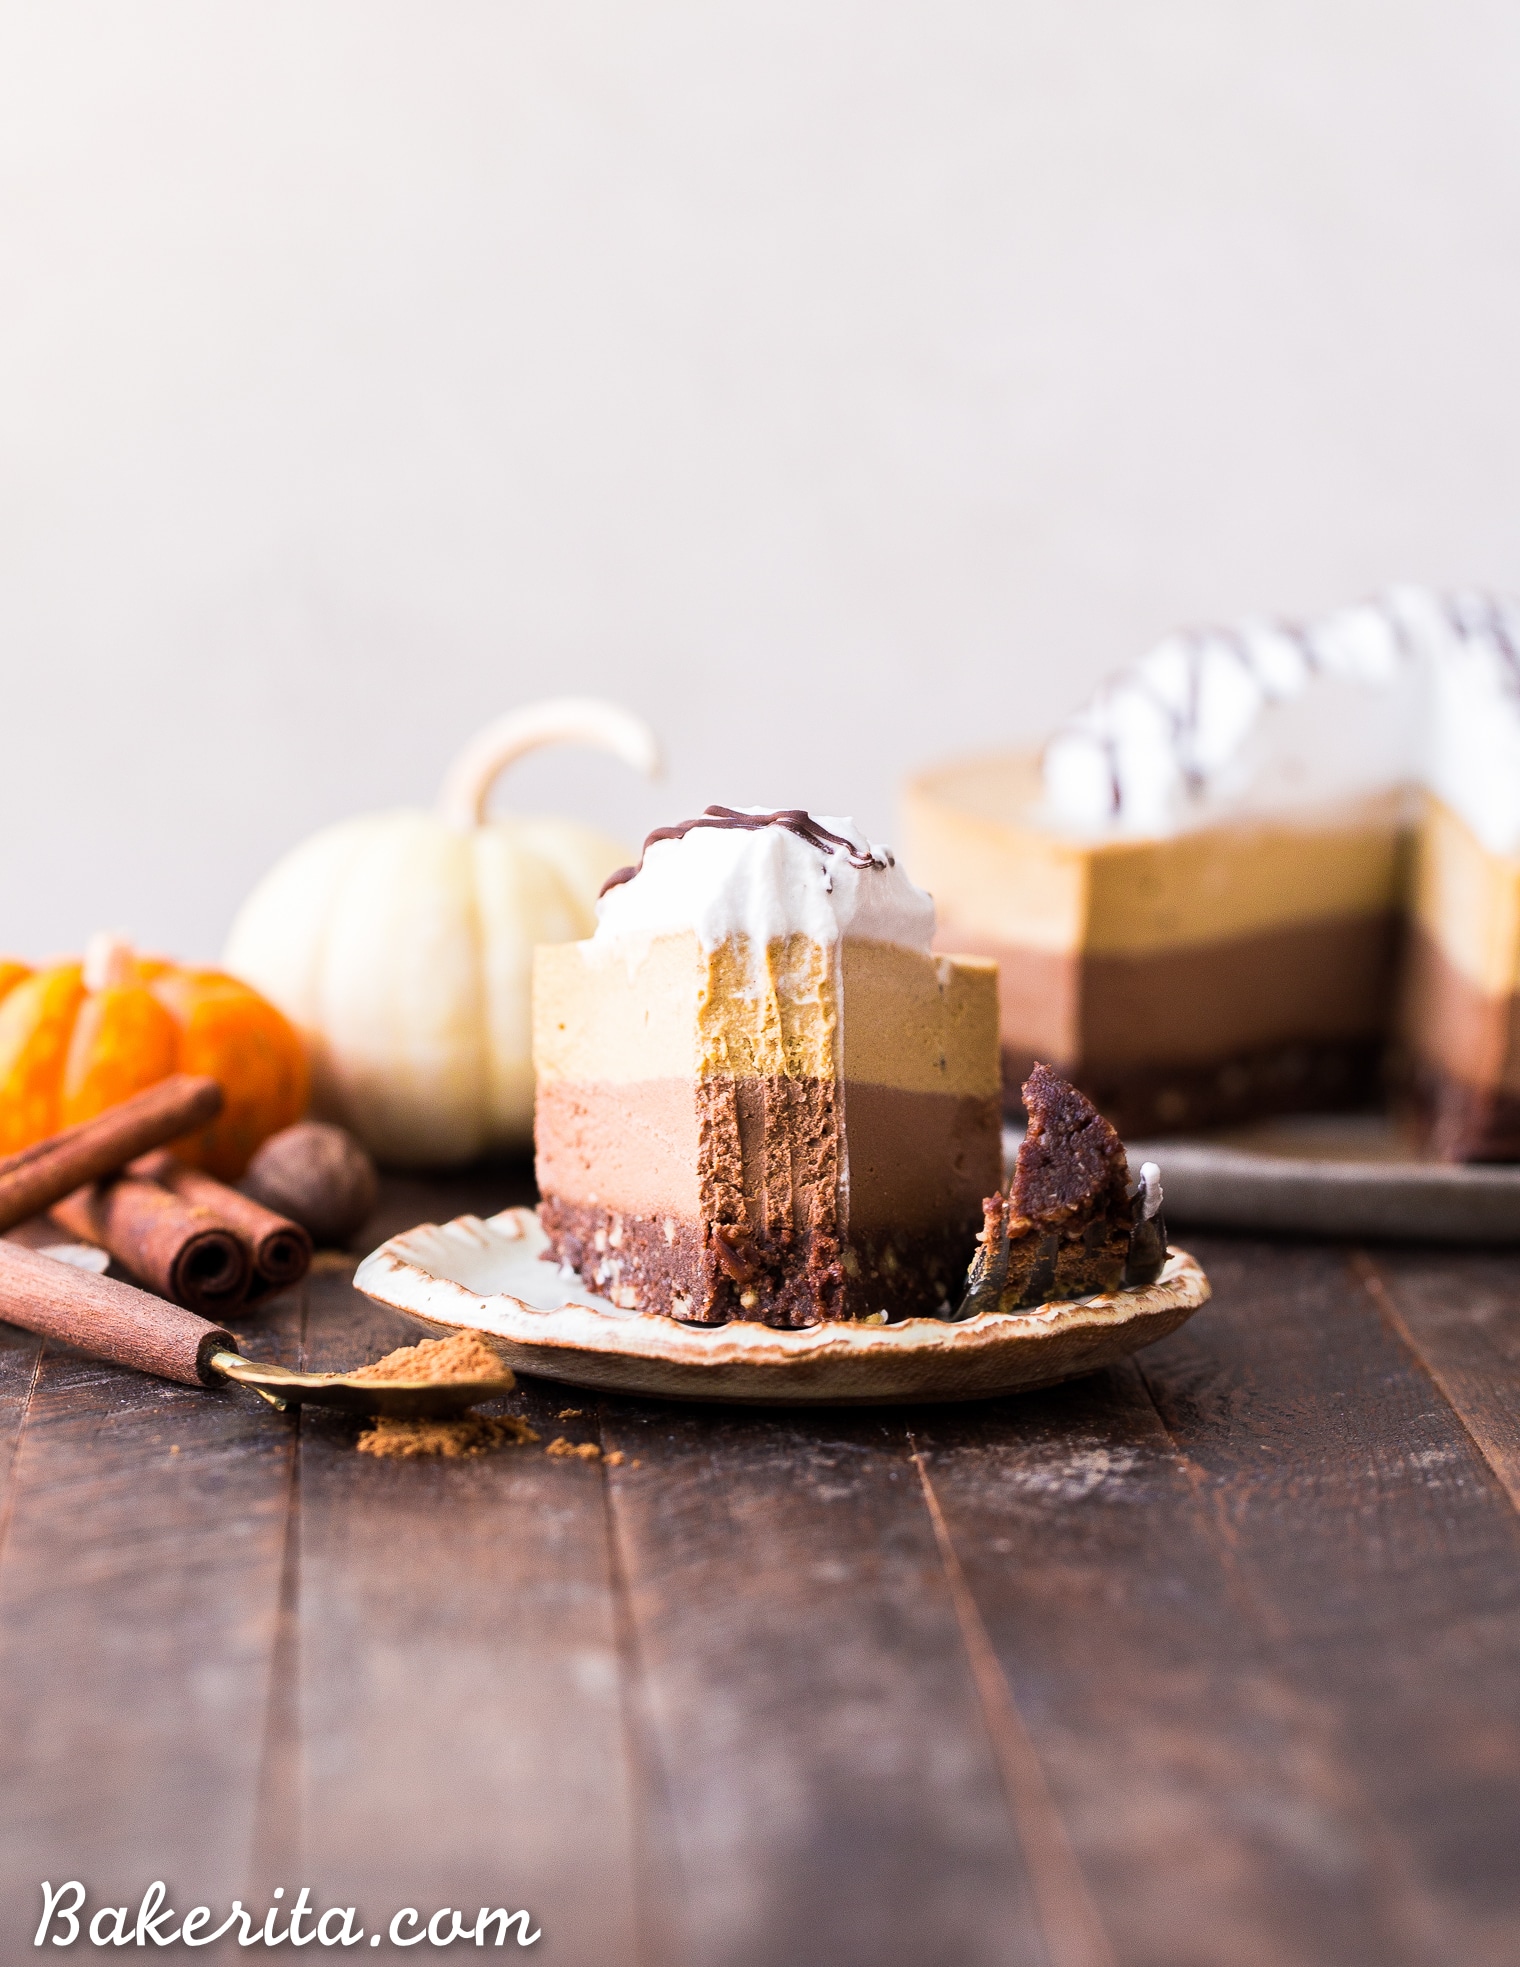 This No-Bake Vegan Chocolate Pumpkin Cheesecake has layers of chocolate and pumpkin spice cashew-based cheesecake, on top of a chocolate date crust. This make-ahead raw dessert is perfect for the holidays.